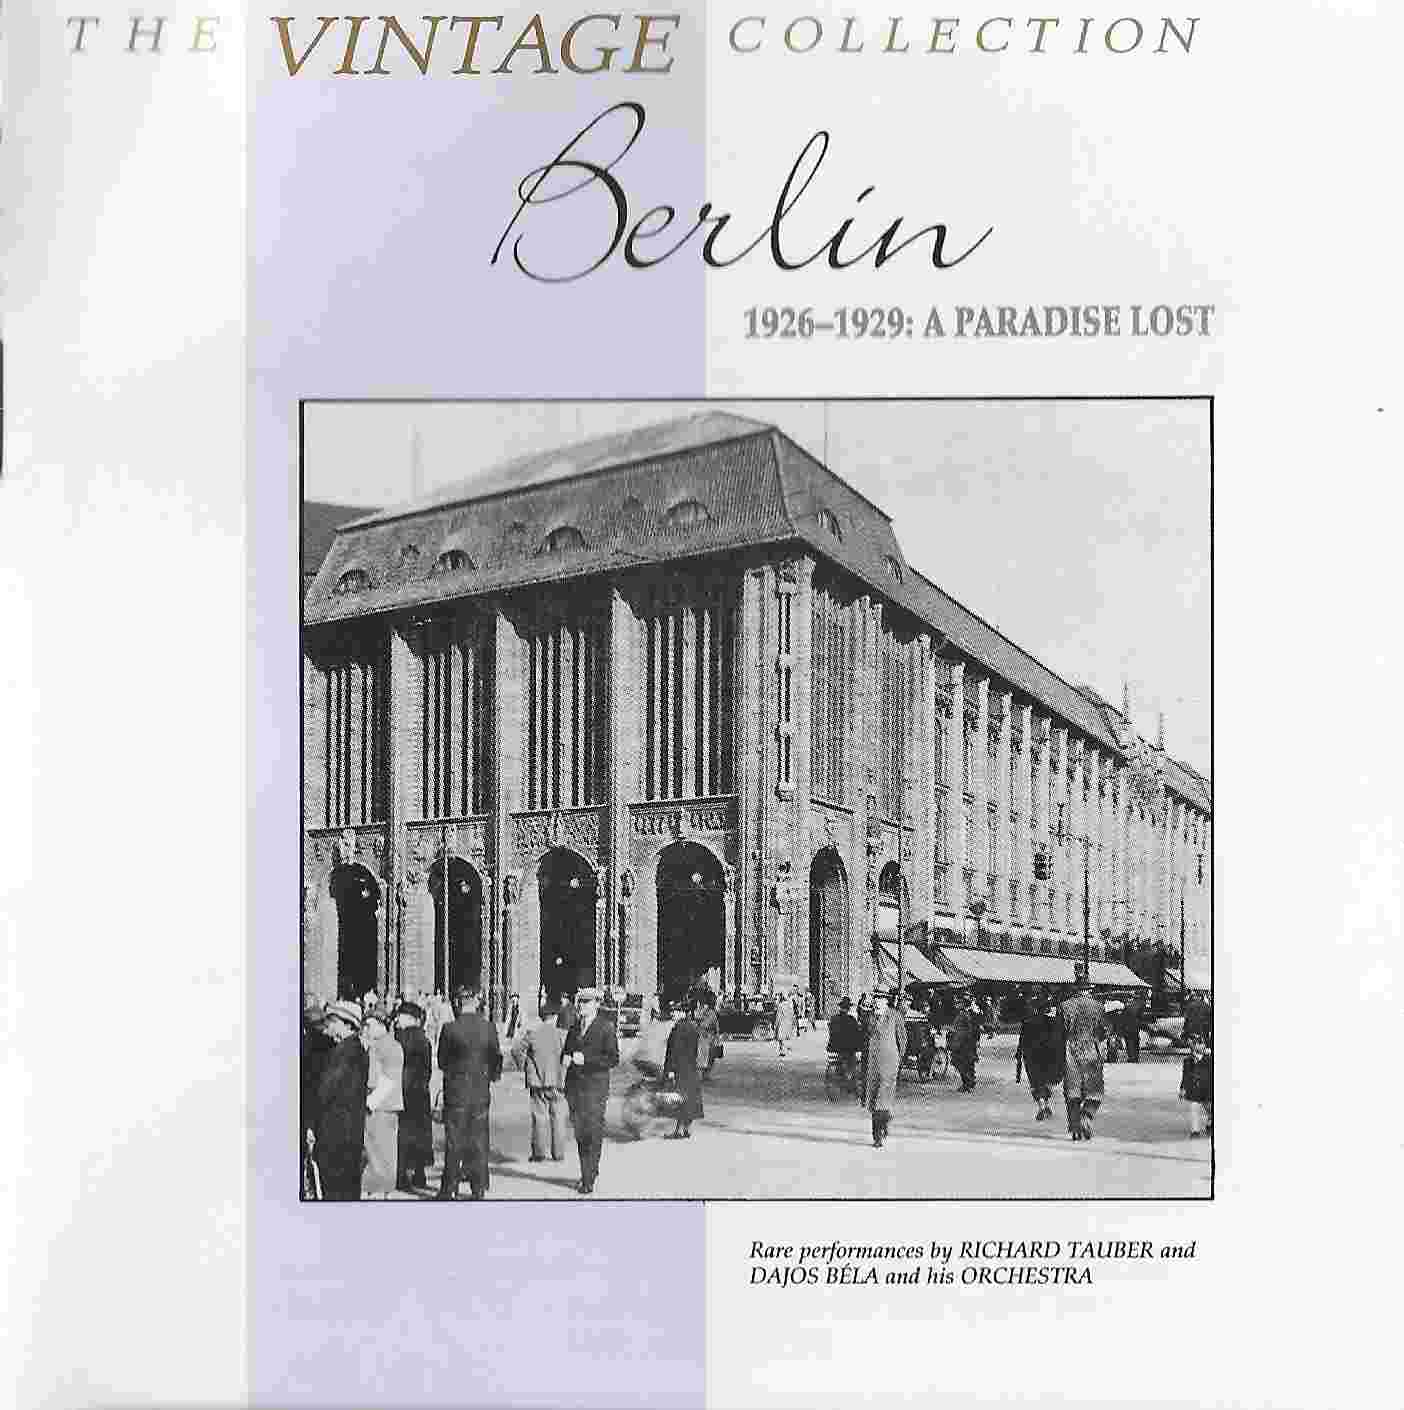 Picture of The vintage collection - Berlin 1926 - 1929 by artist Various from the BBC cds - Records and Tapes library